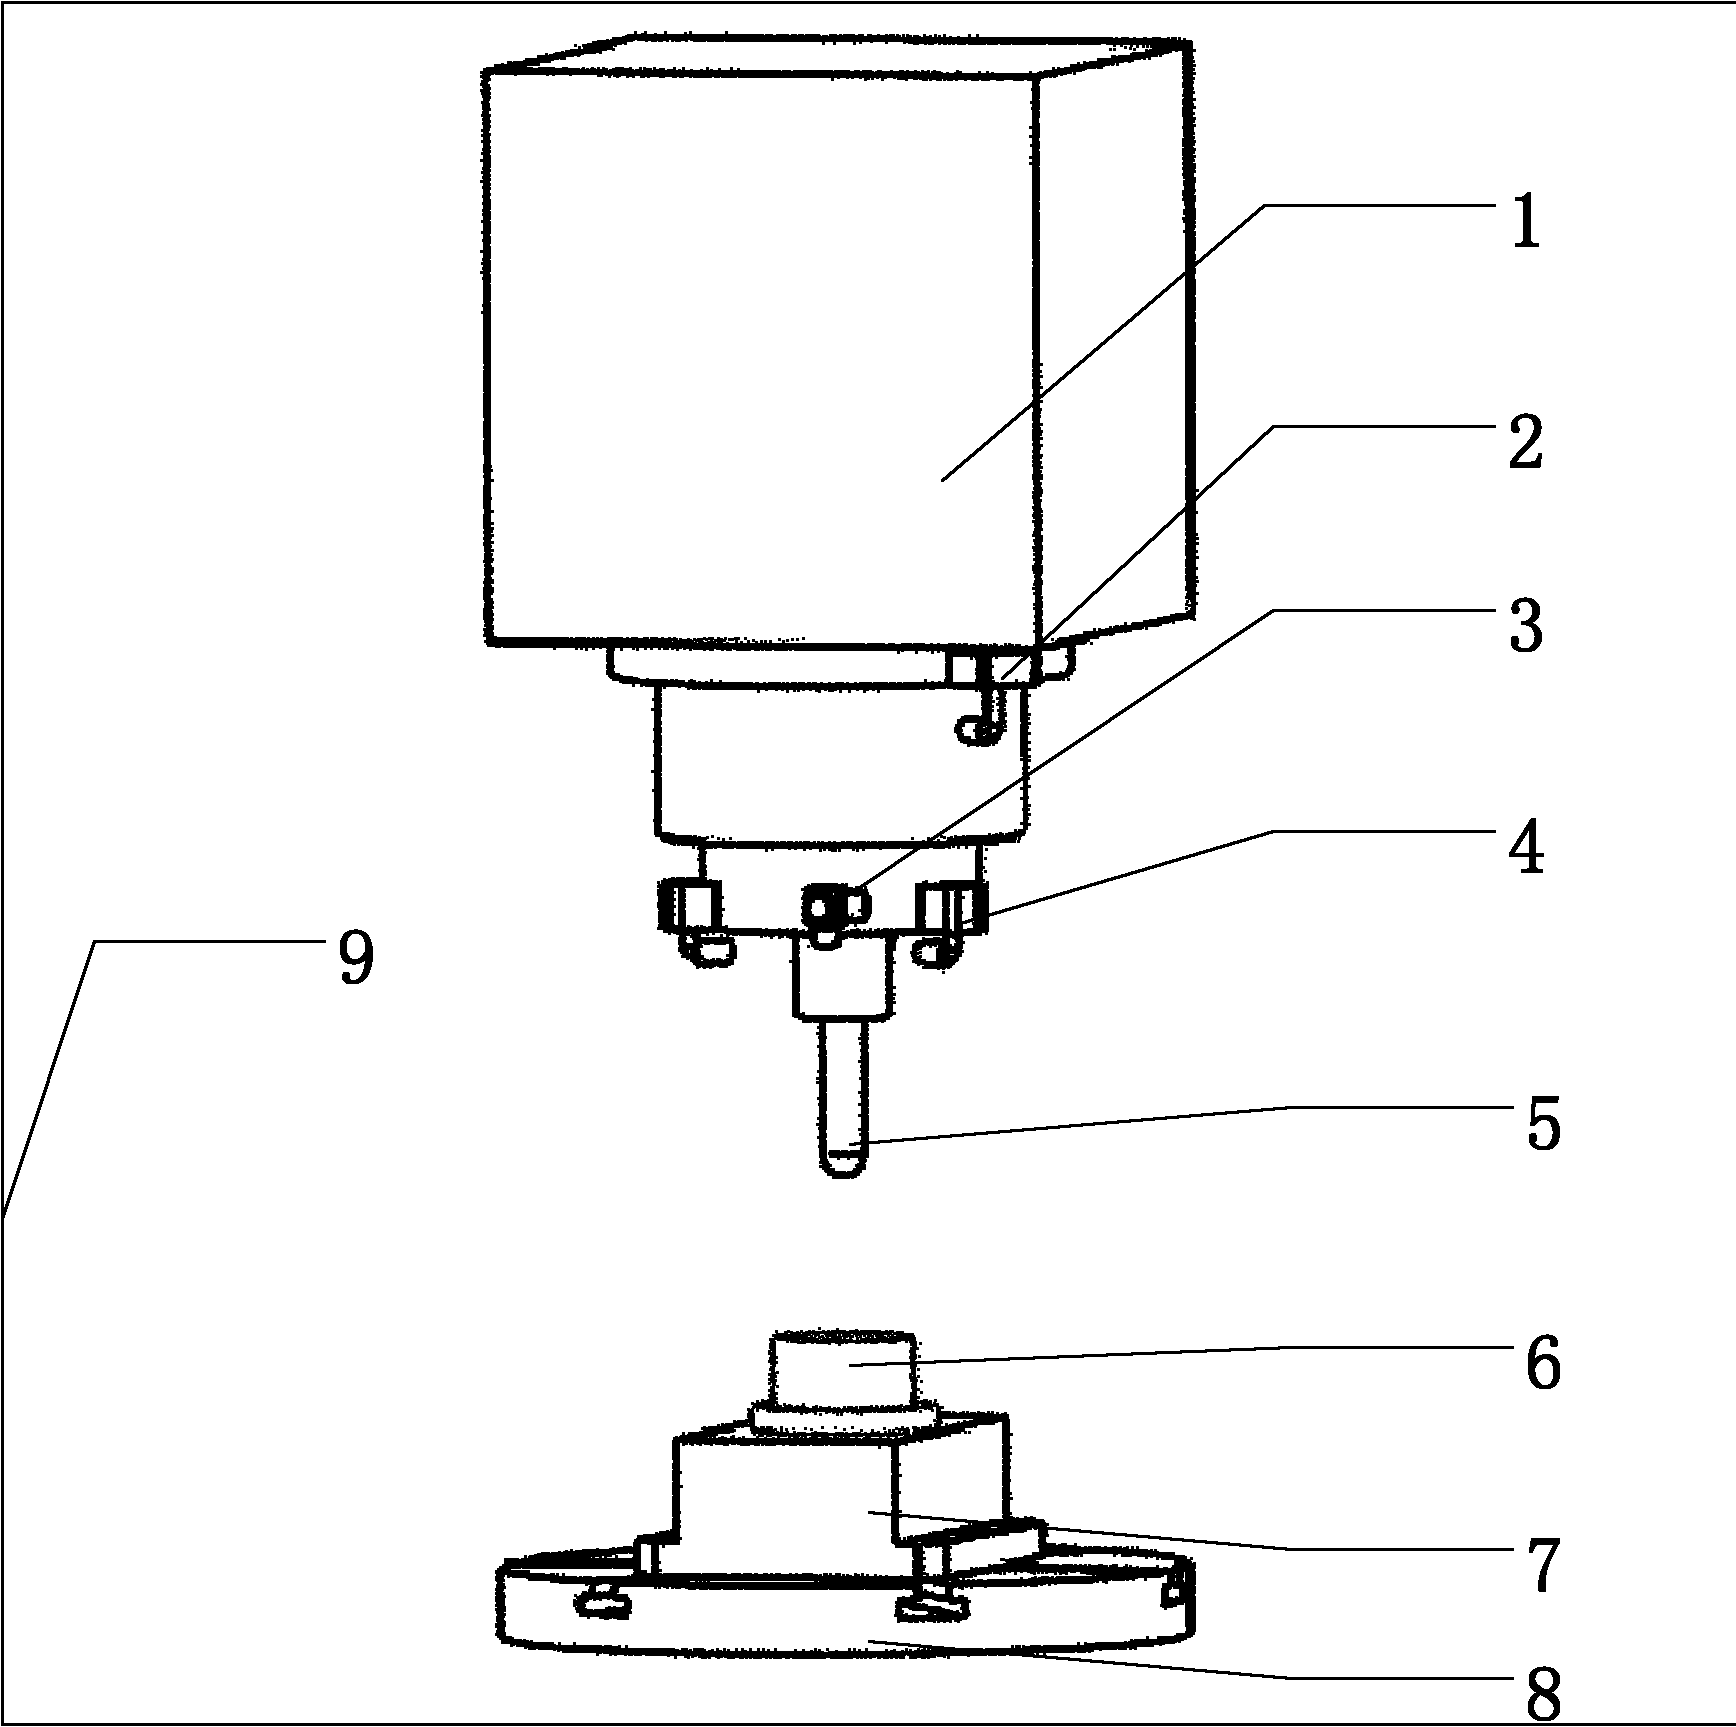 Method and system for testing reliability of electric spindle in machining center